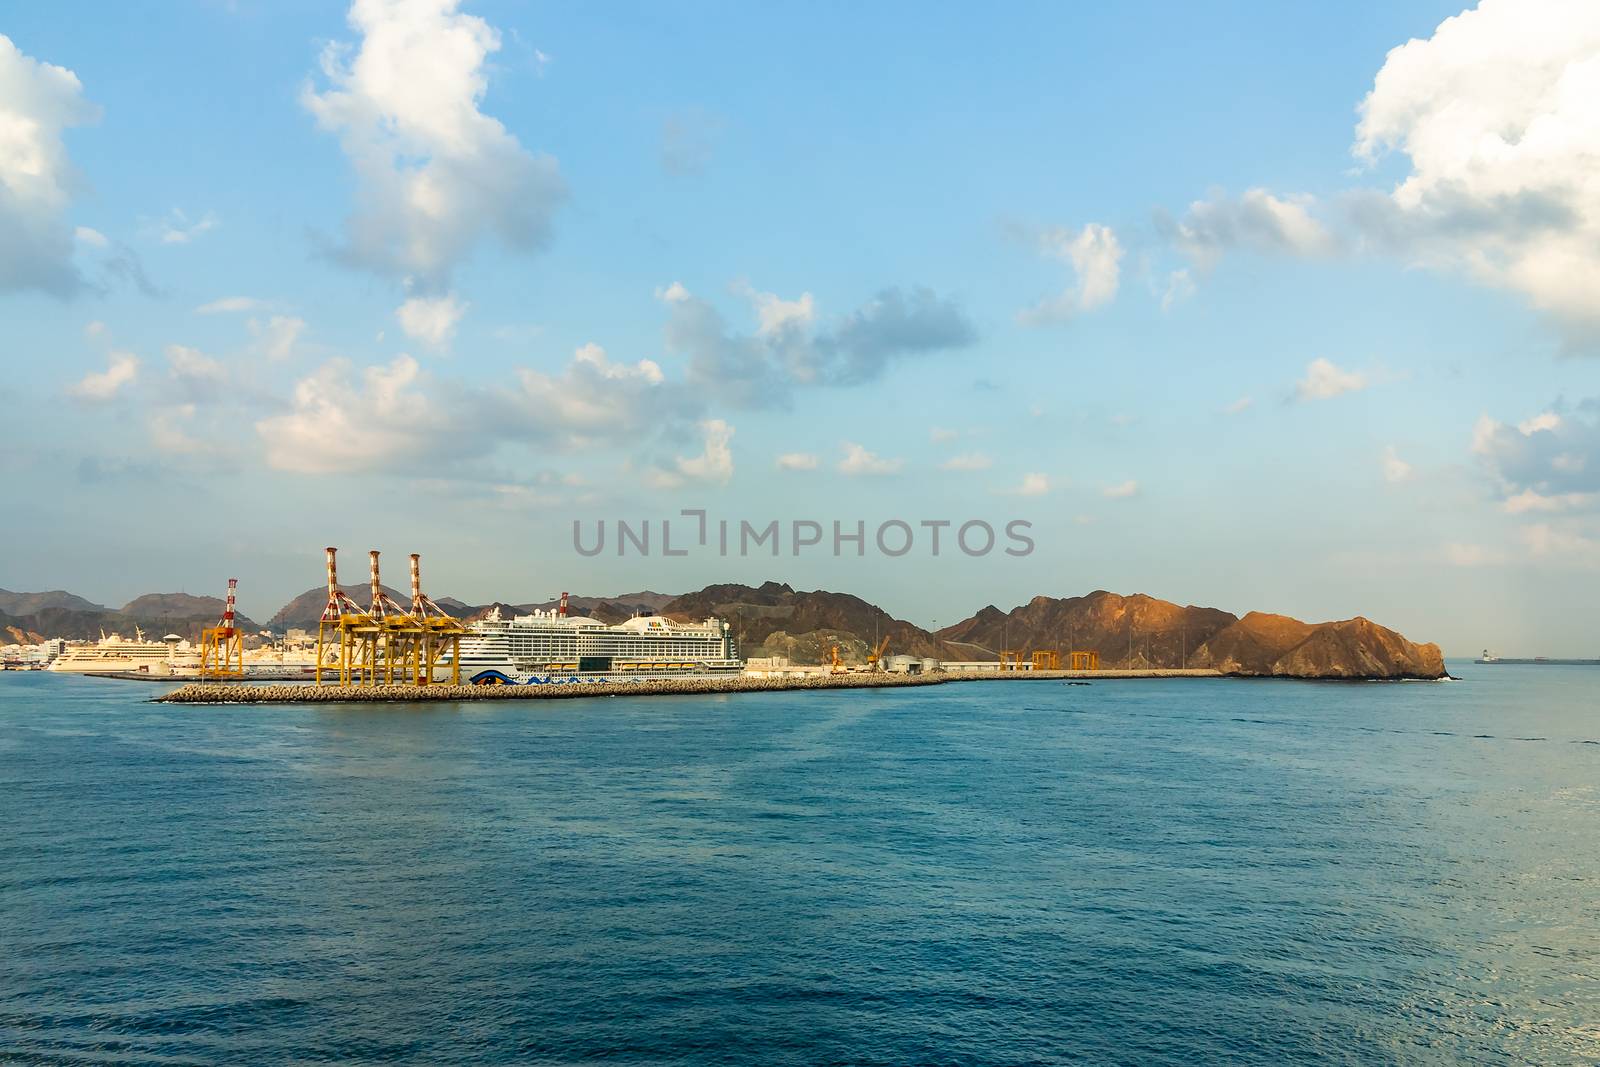 Muscat, Oman - December 16, 2018: Tourist liner at the coast in the fjords of the Gulf of Oman.